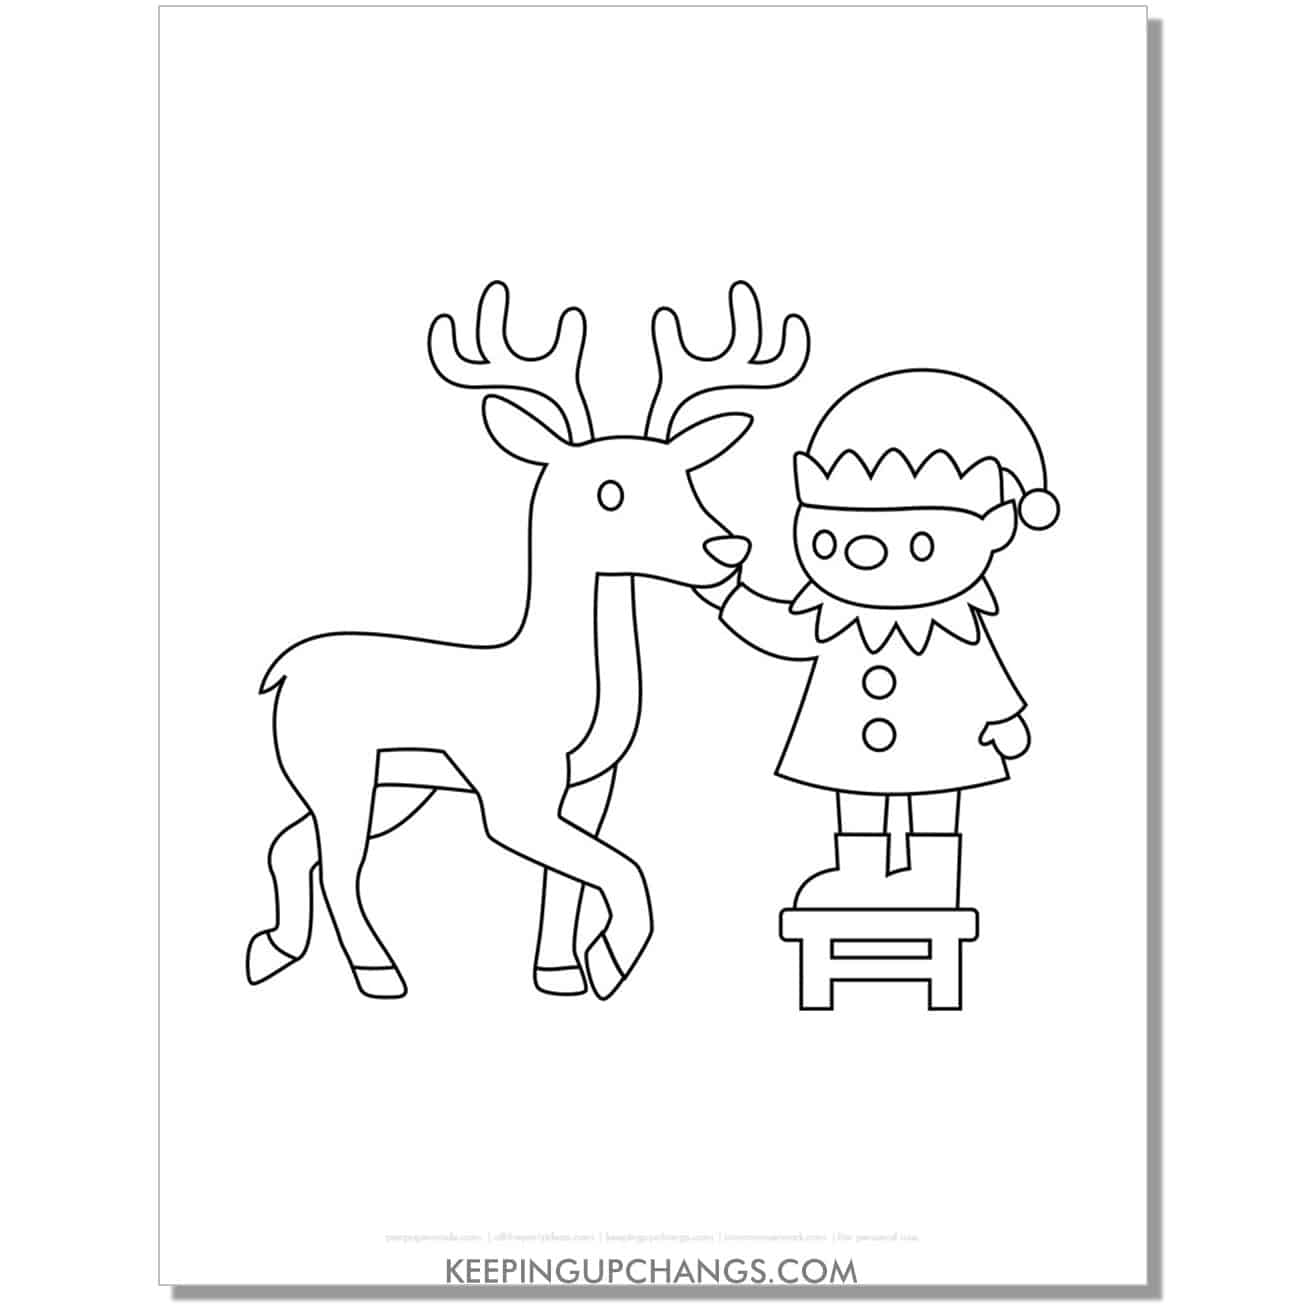 free elf and reindeer coloring page for toddlers.